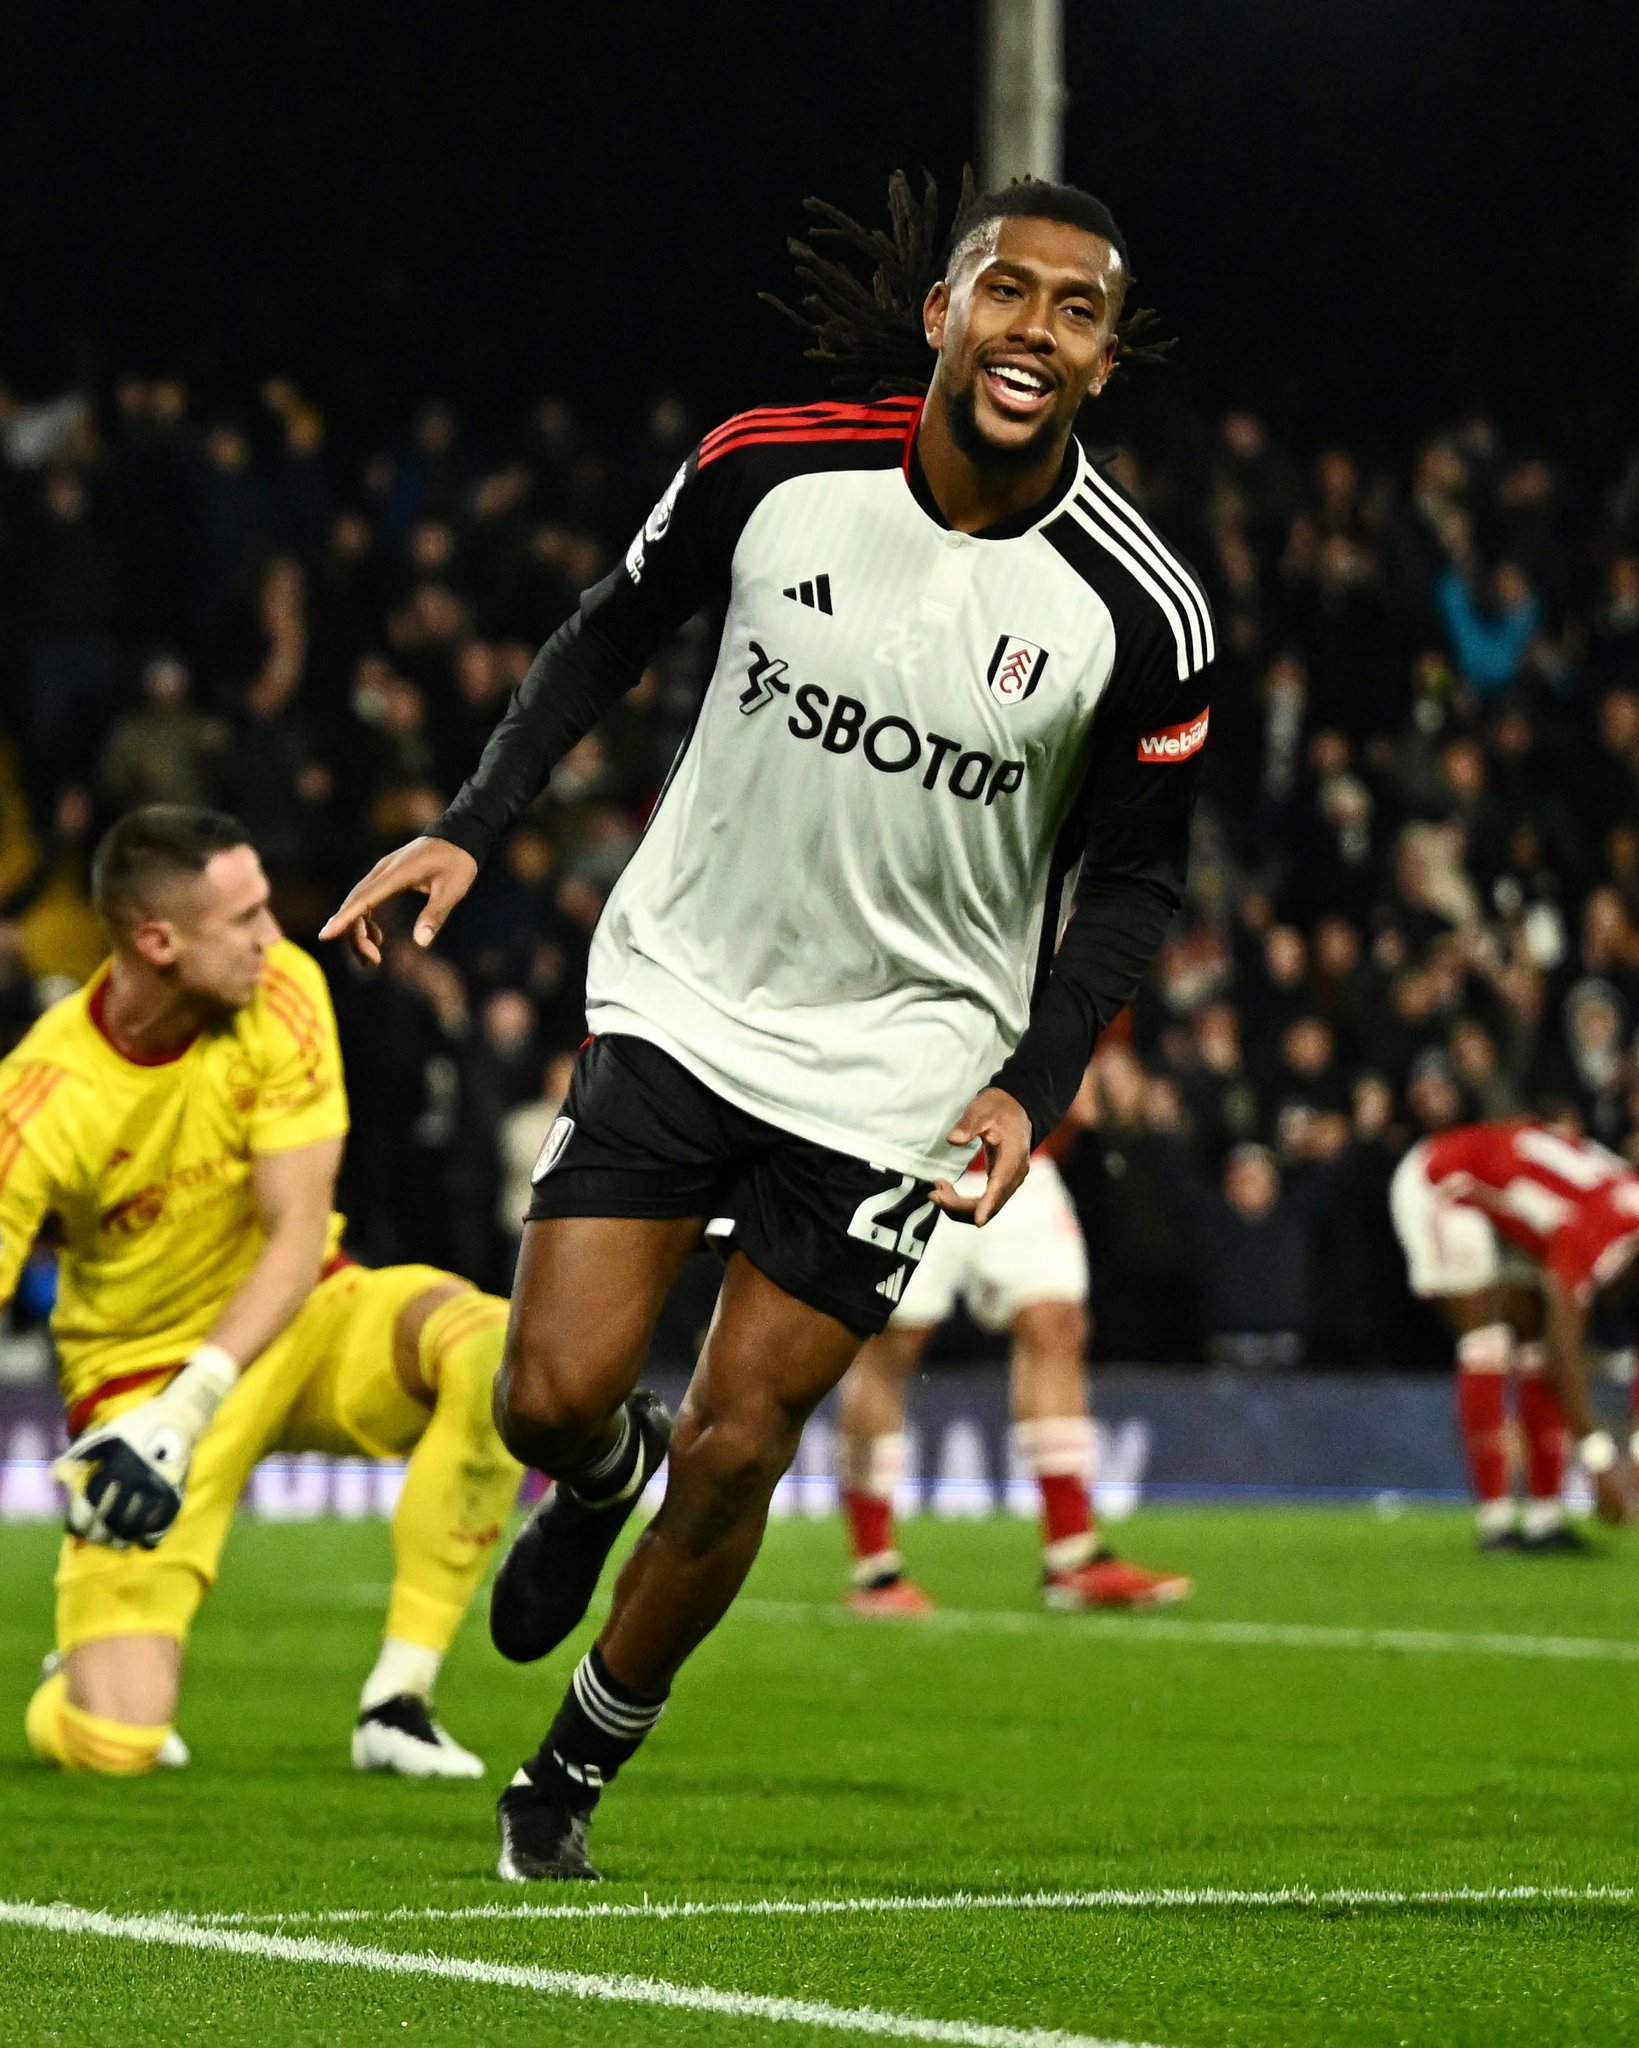 Alex Iwobi clinches Fulham's Goal of the Month honor